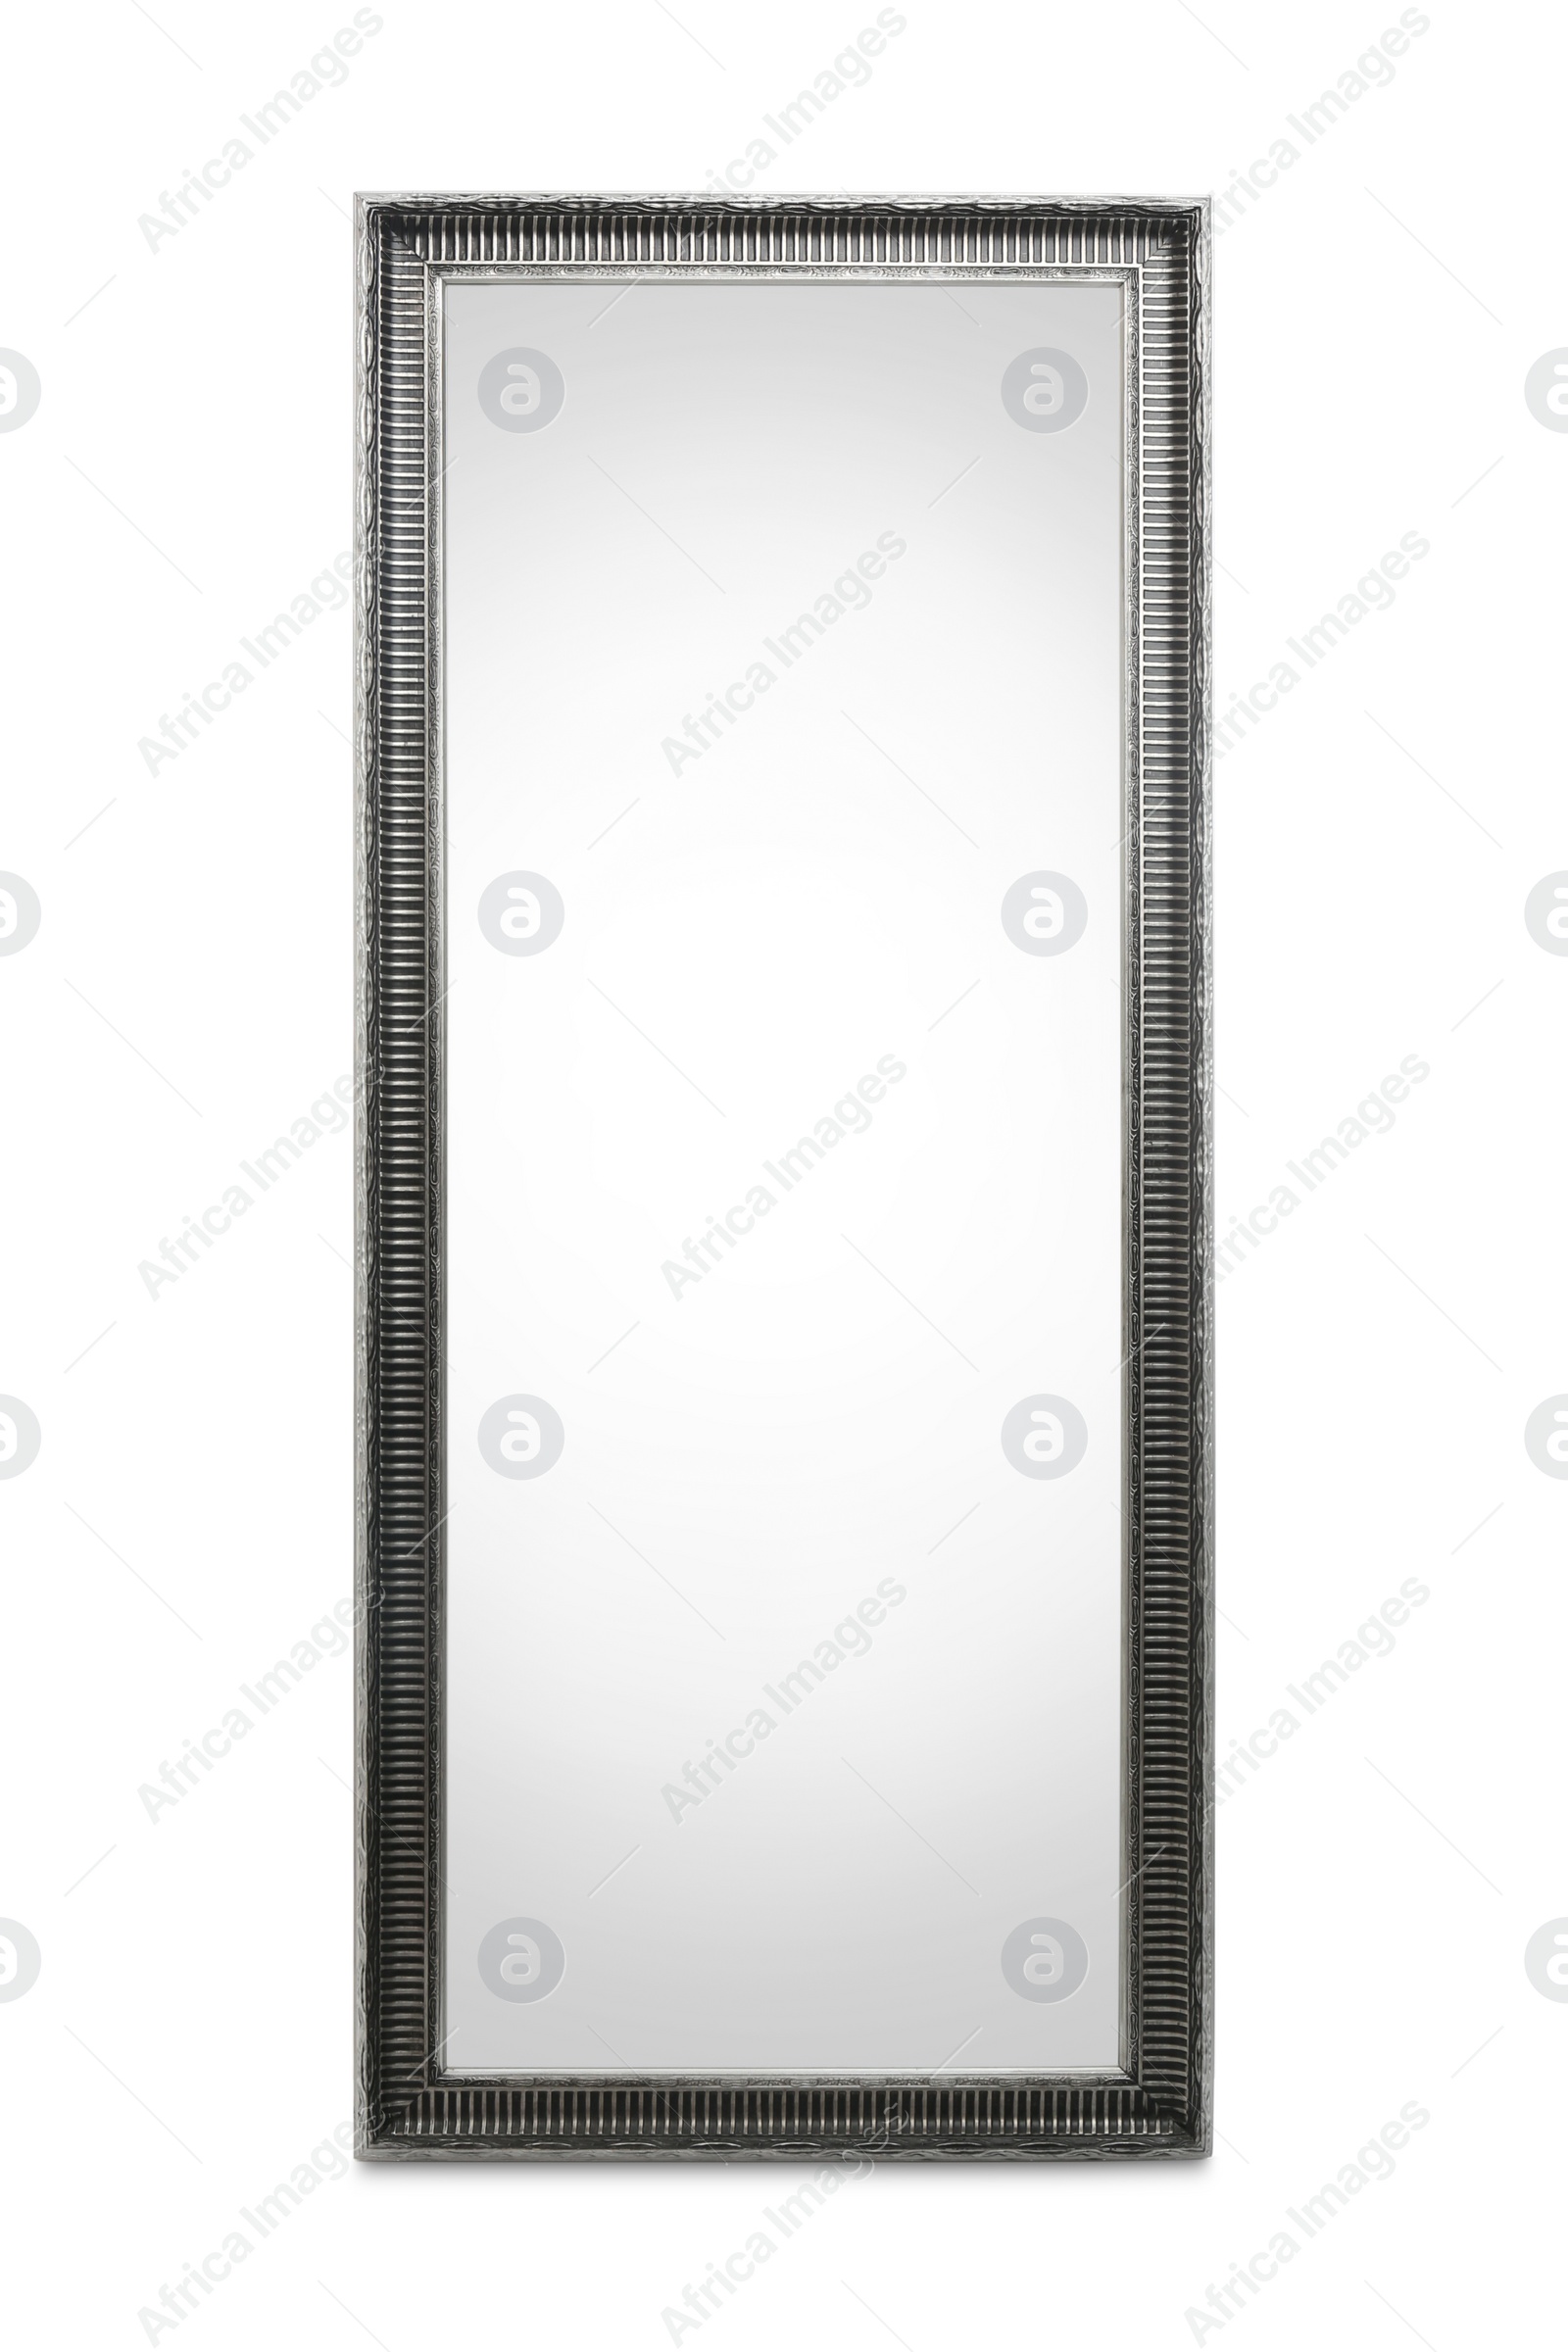 Photo of Vintage full length mirror isolated on white